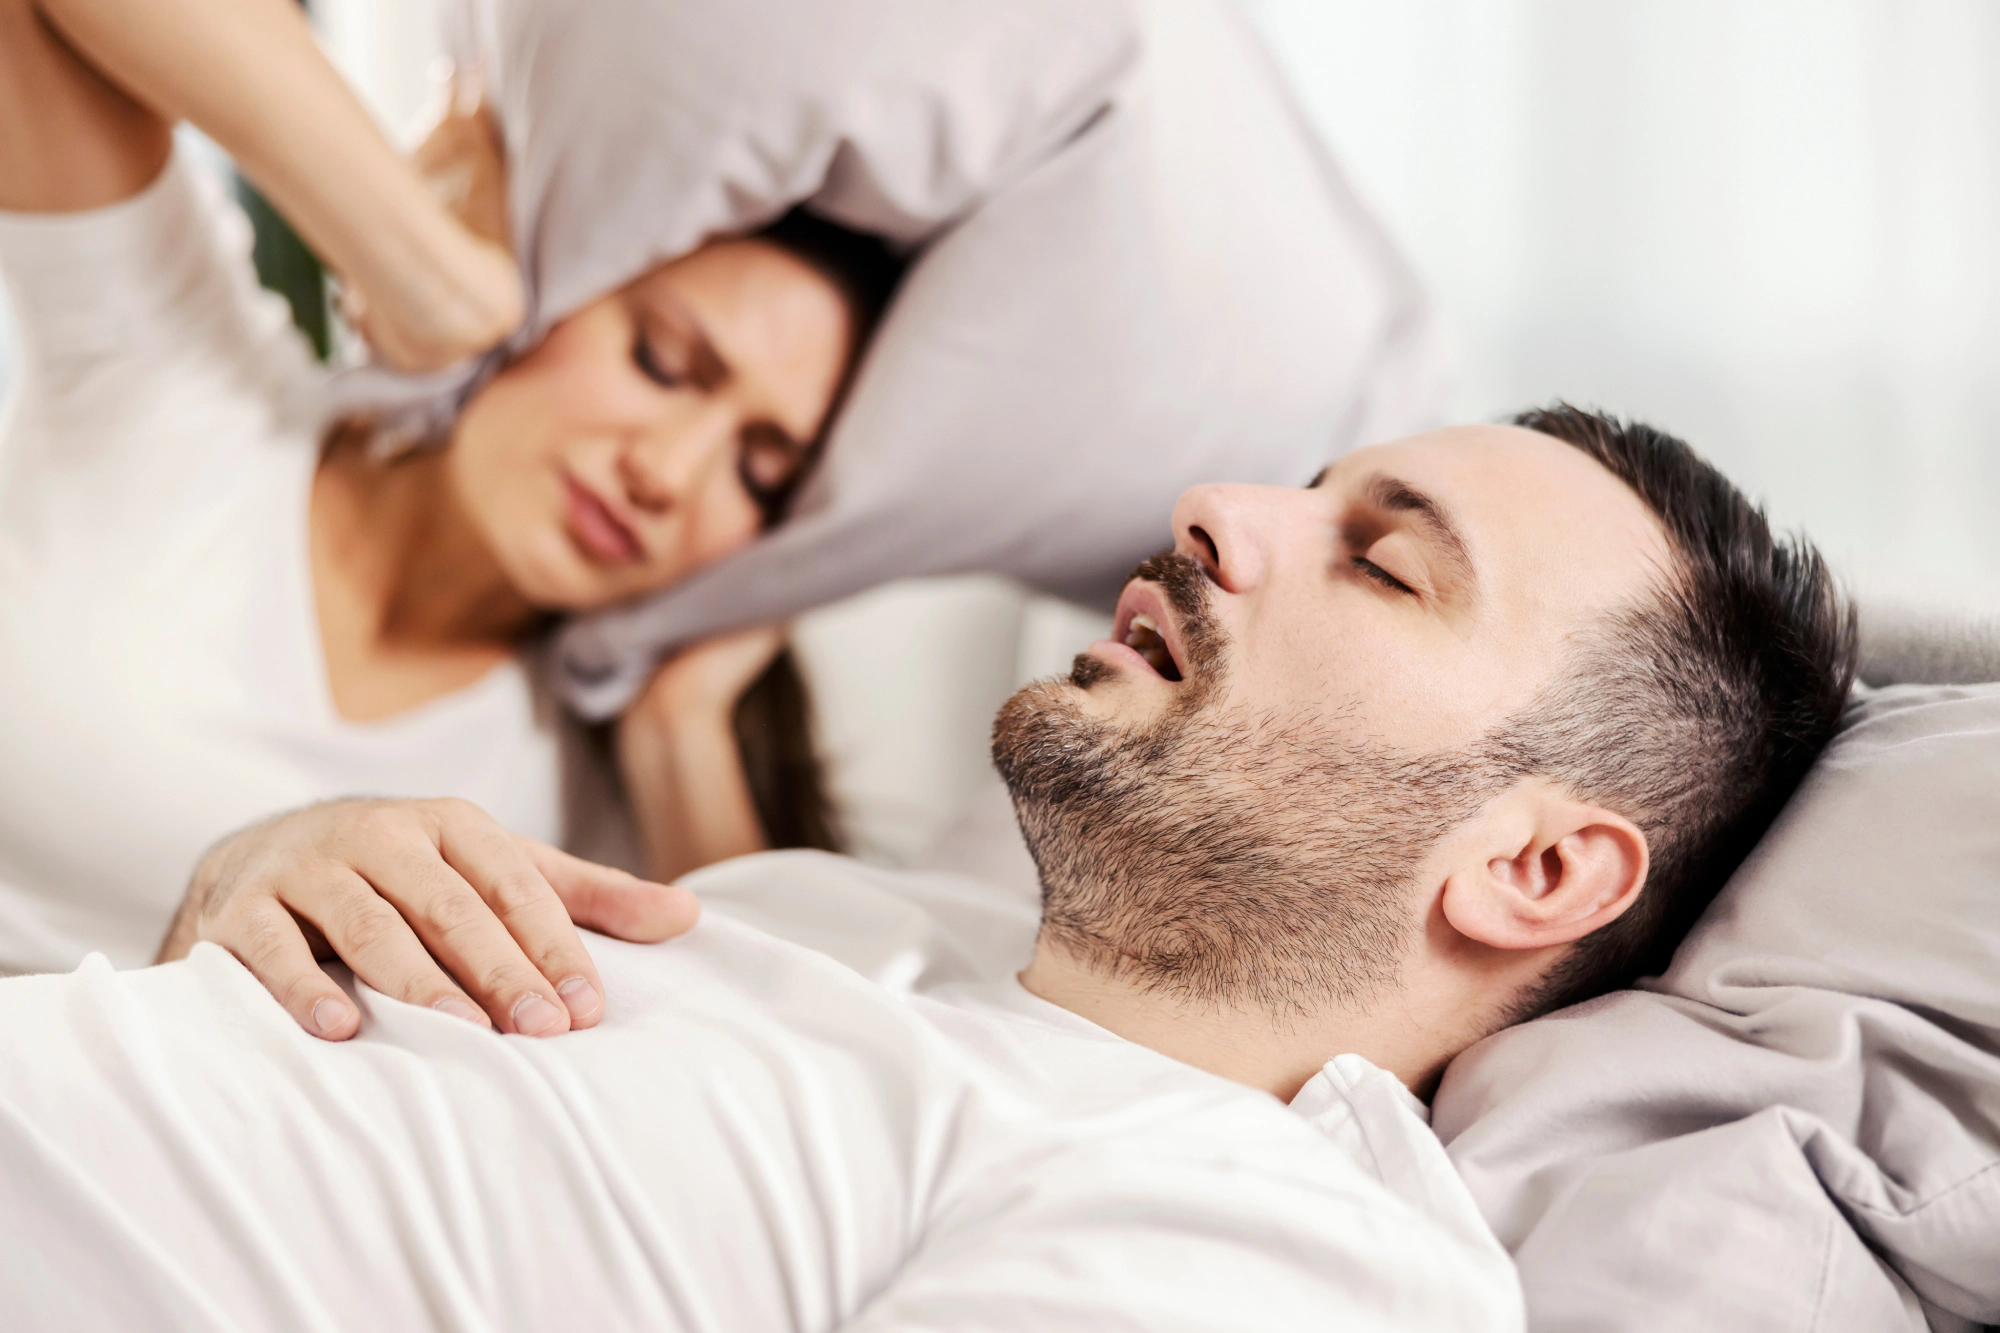 Man in bed snored while the woman next to him plugs her ears.